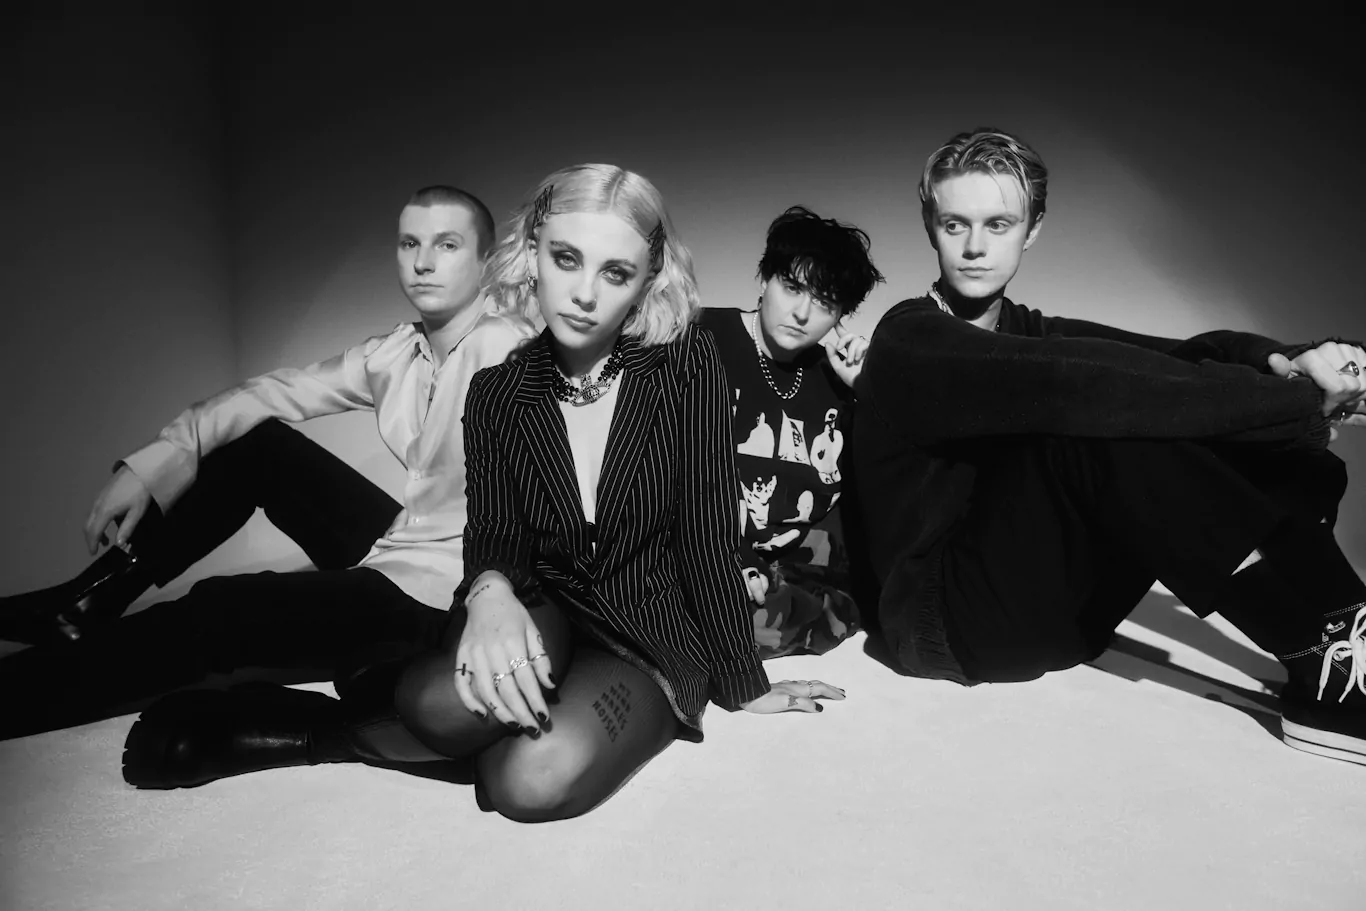 PALE WAVES announce new album ‘Unwanted’ – Hear new single ‘Lies’